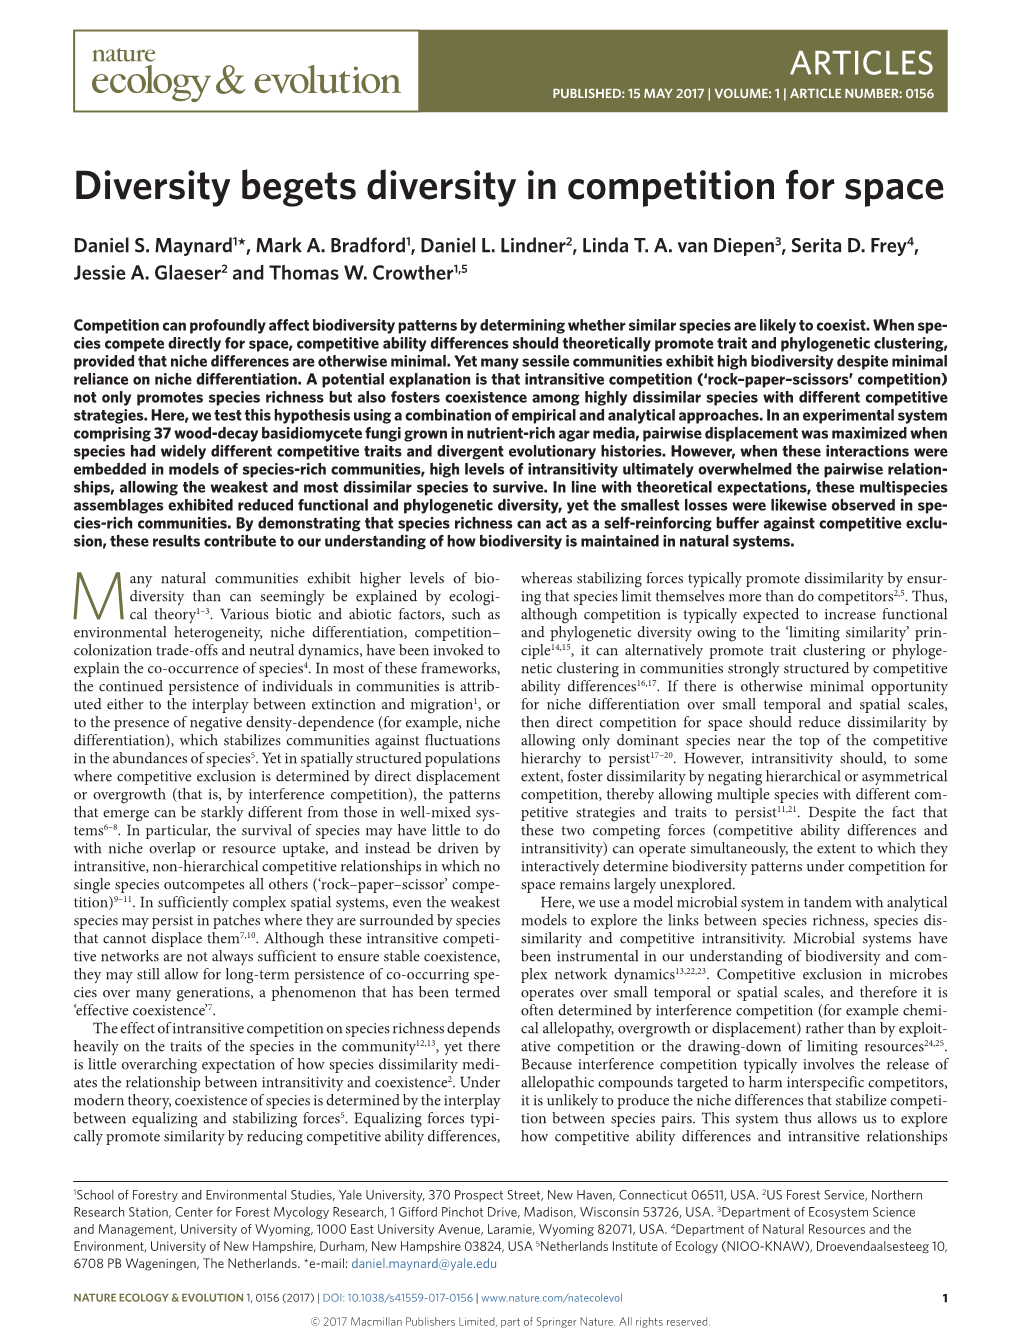 Diversity Begets Diversity in Competition for Space